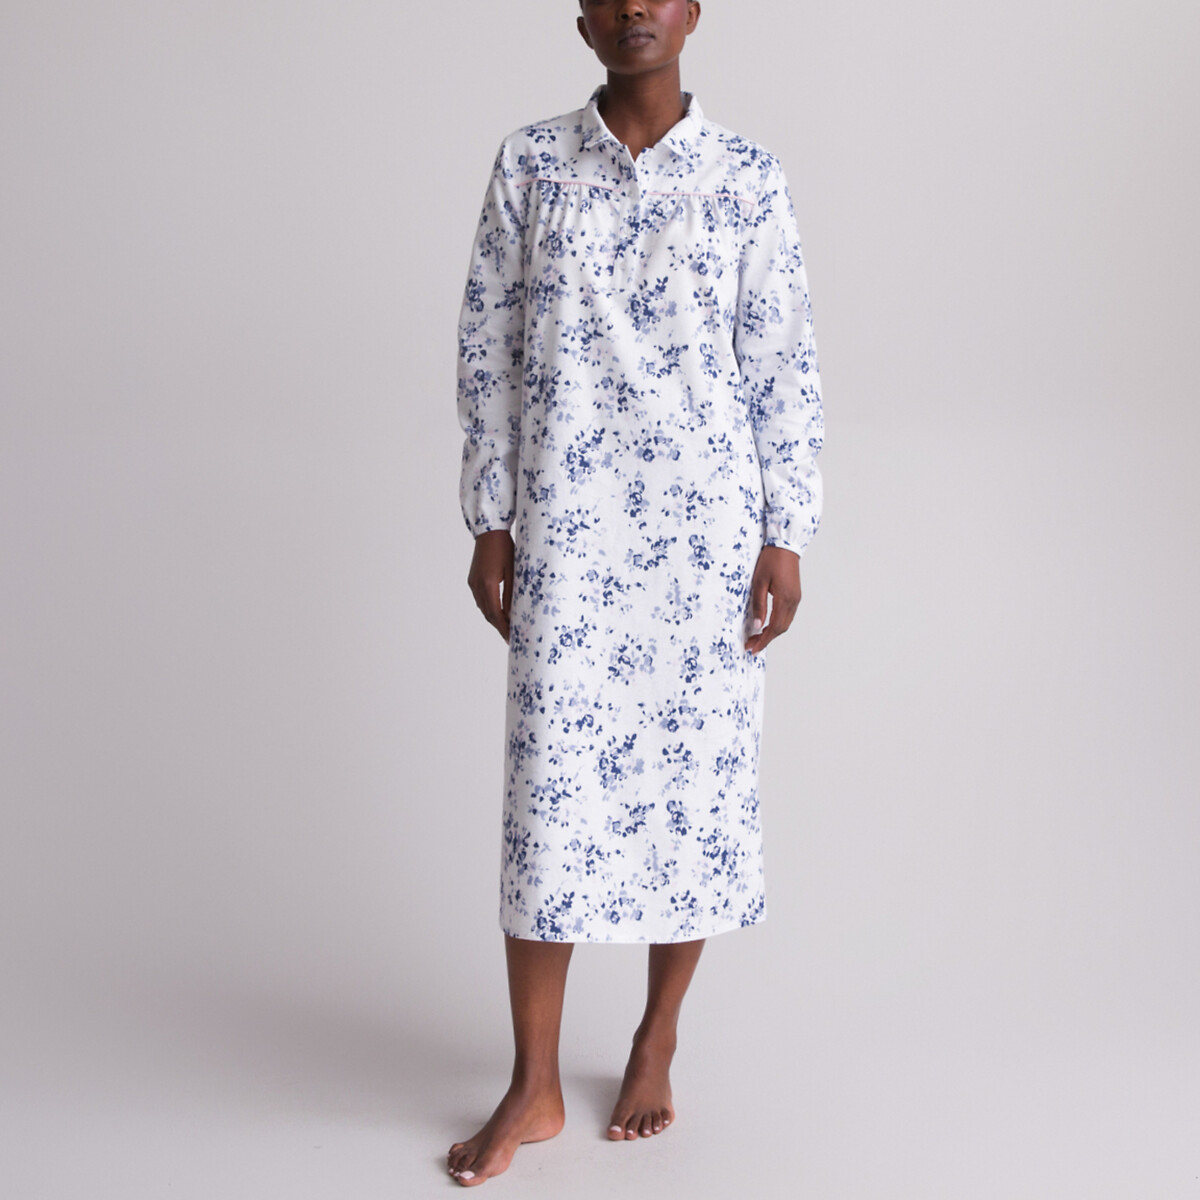 Floral brushed cotton nightdress, floral print, Anne Weyburn | La Redoute